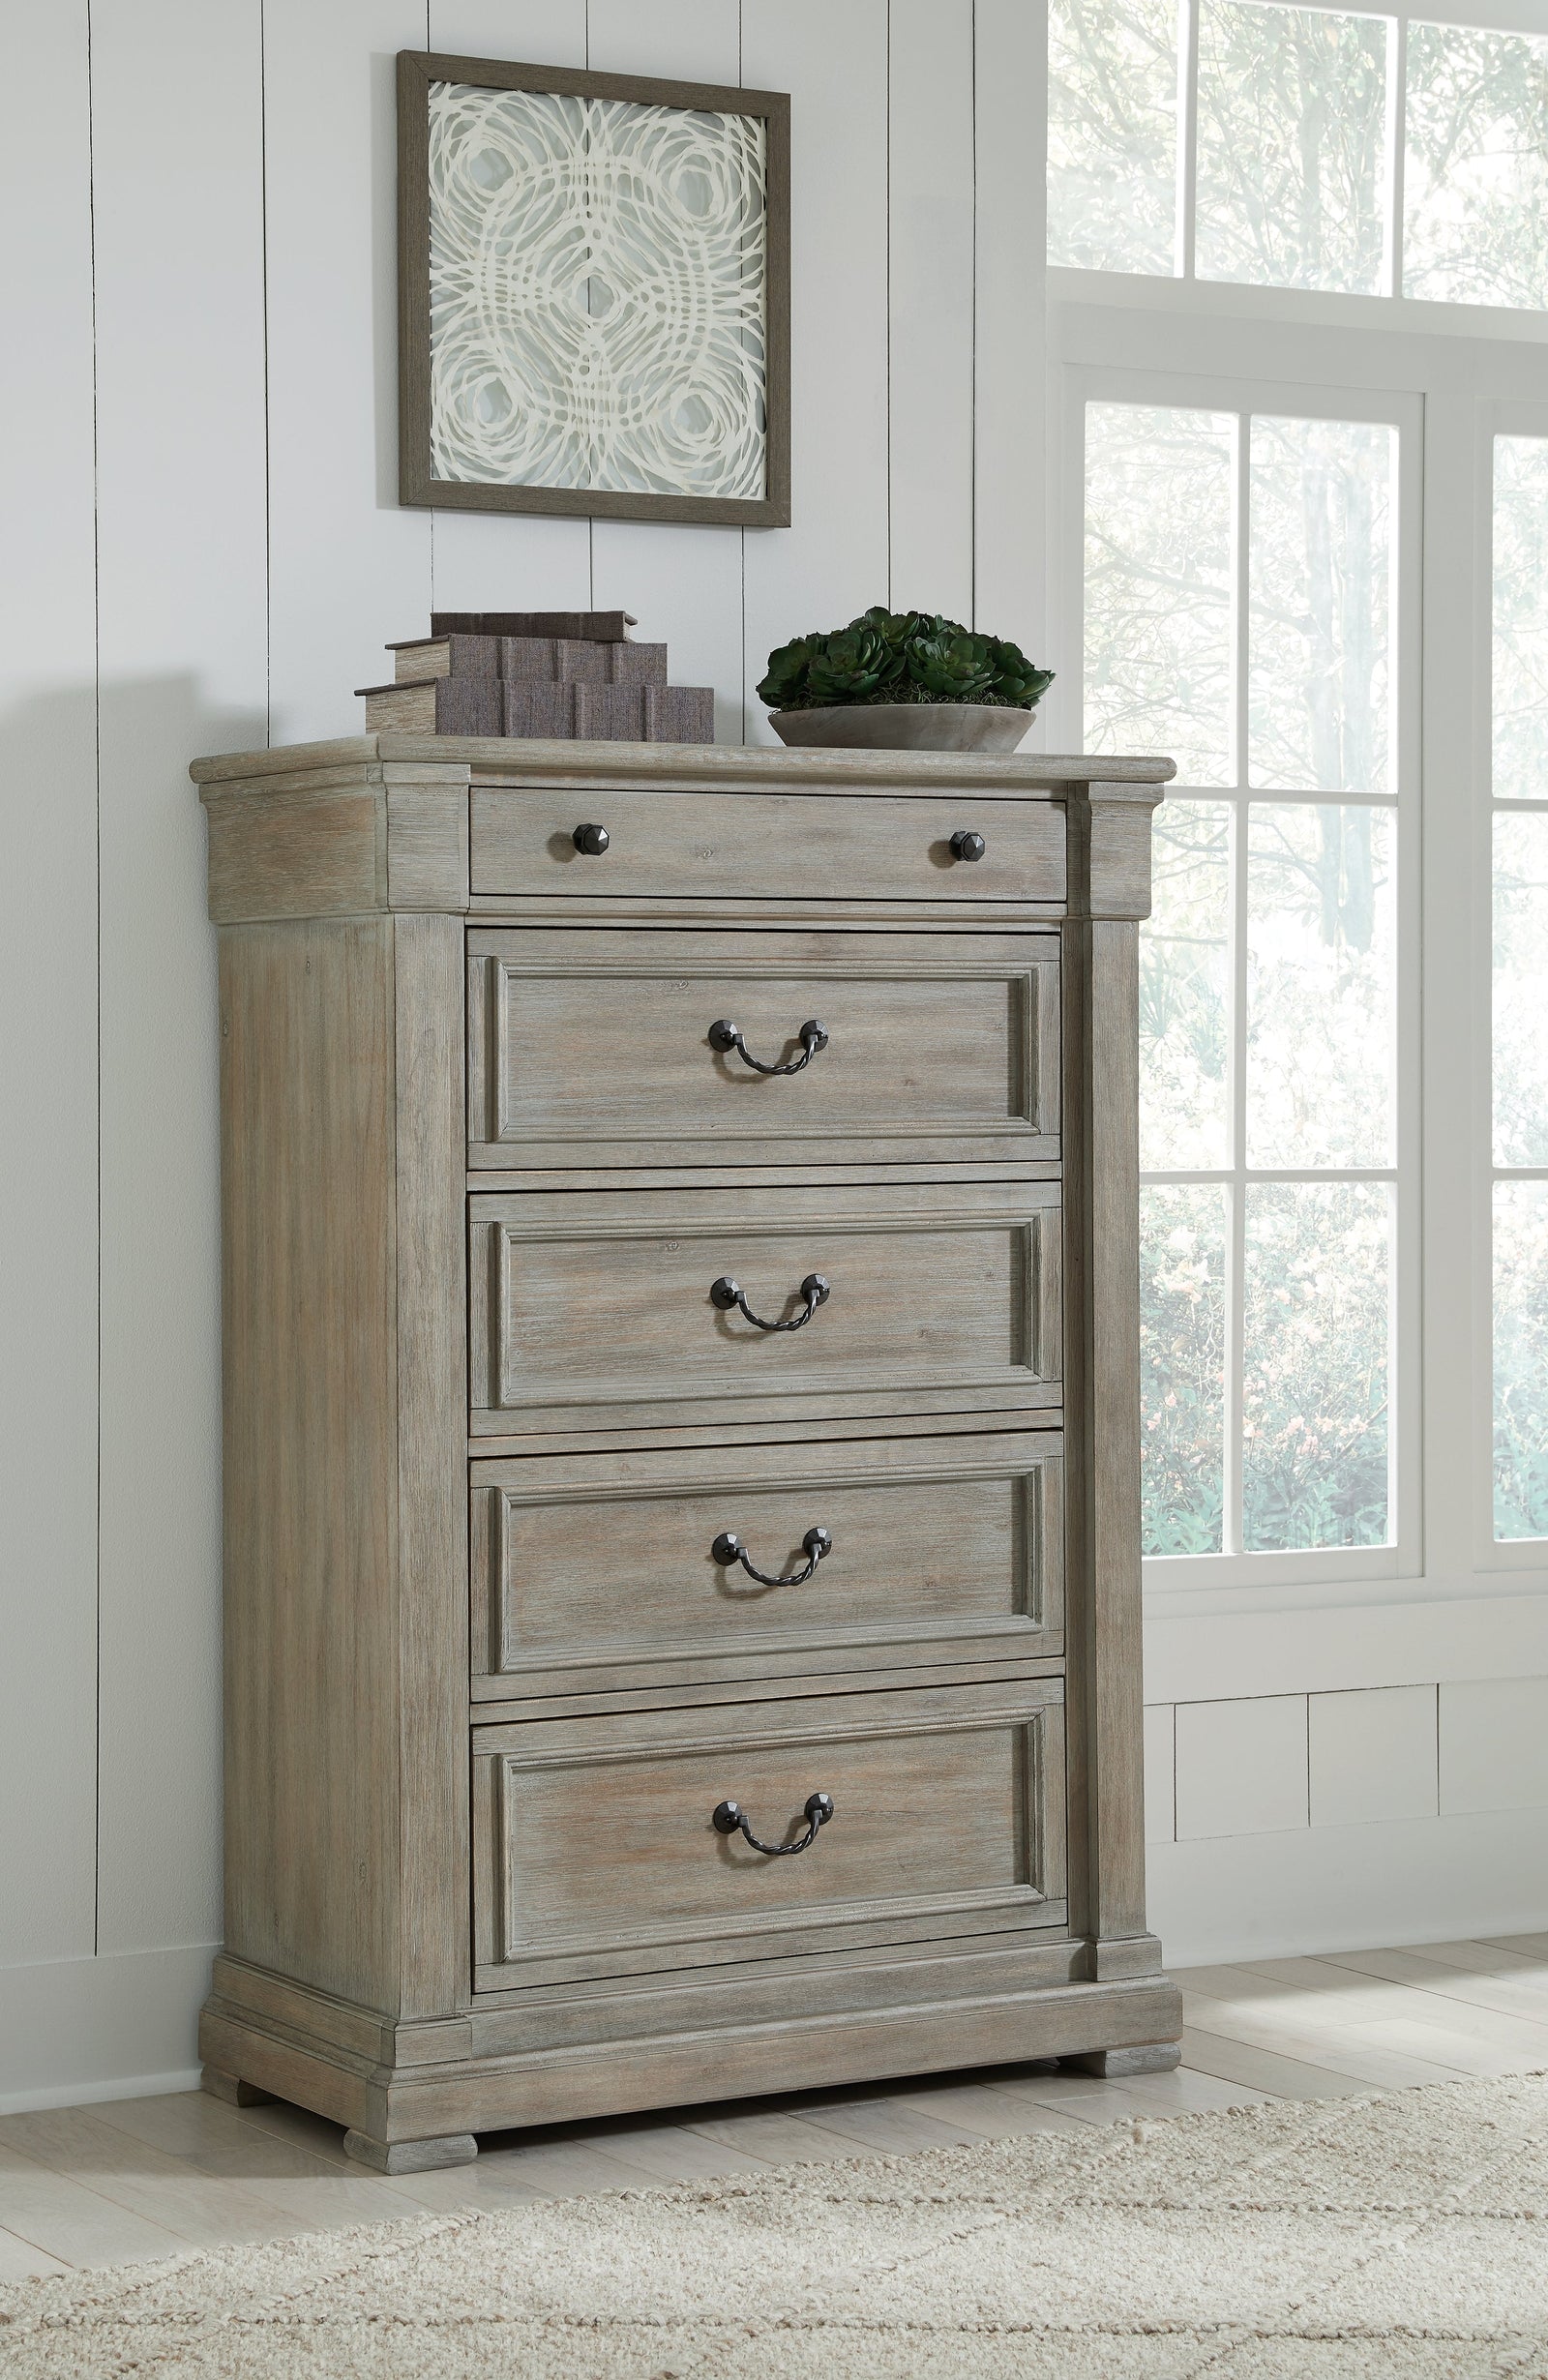 Moreshire Bisque Chest Of Drawers